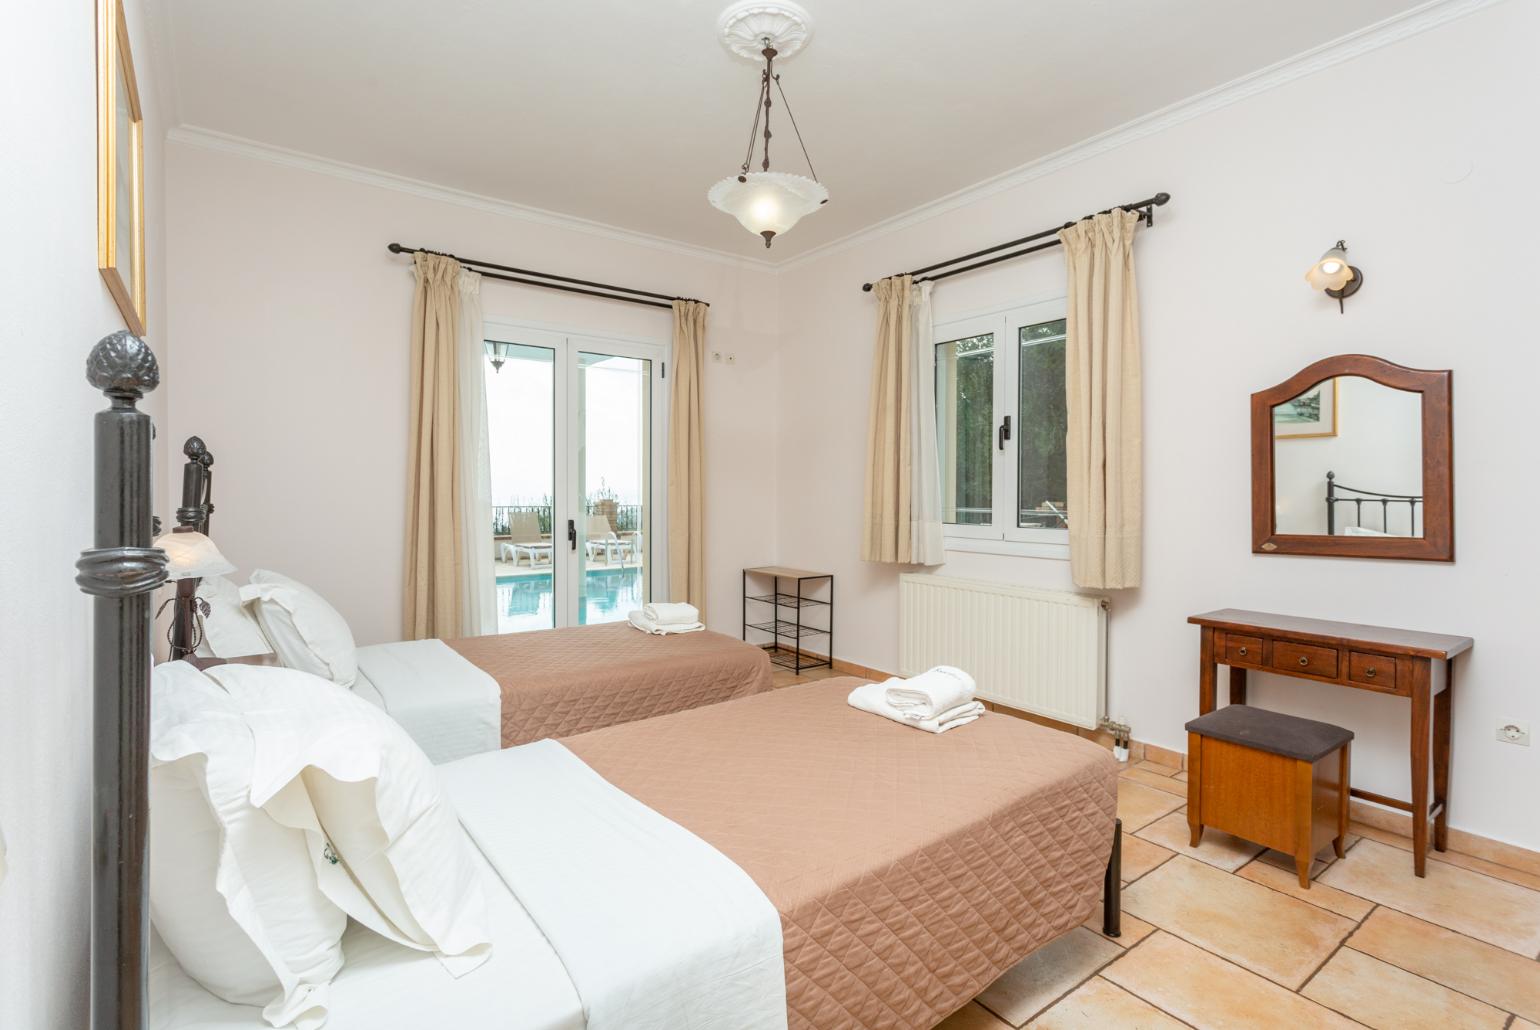 Twin bedroom with en suite bathroom, A/C, and pool terrace access with panoramic sea views